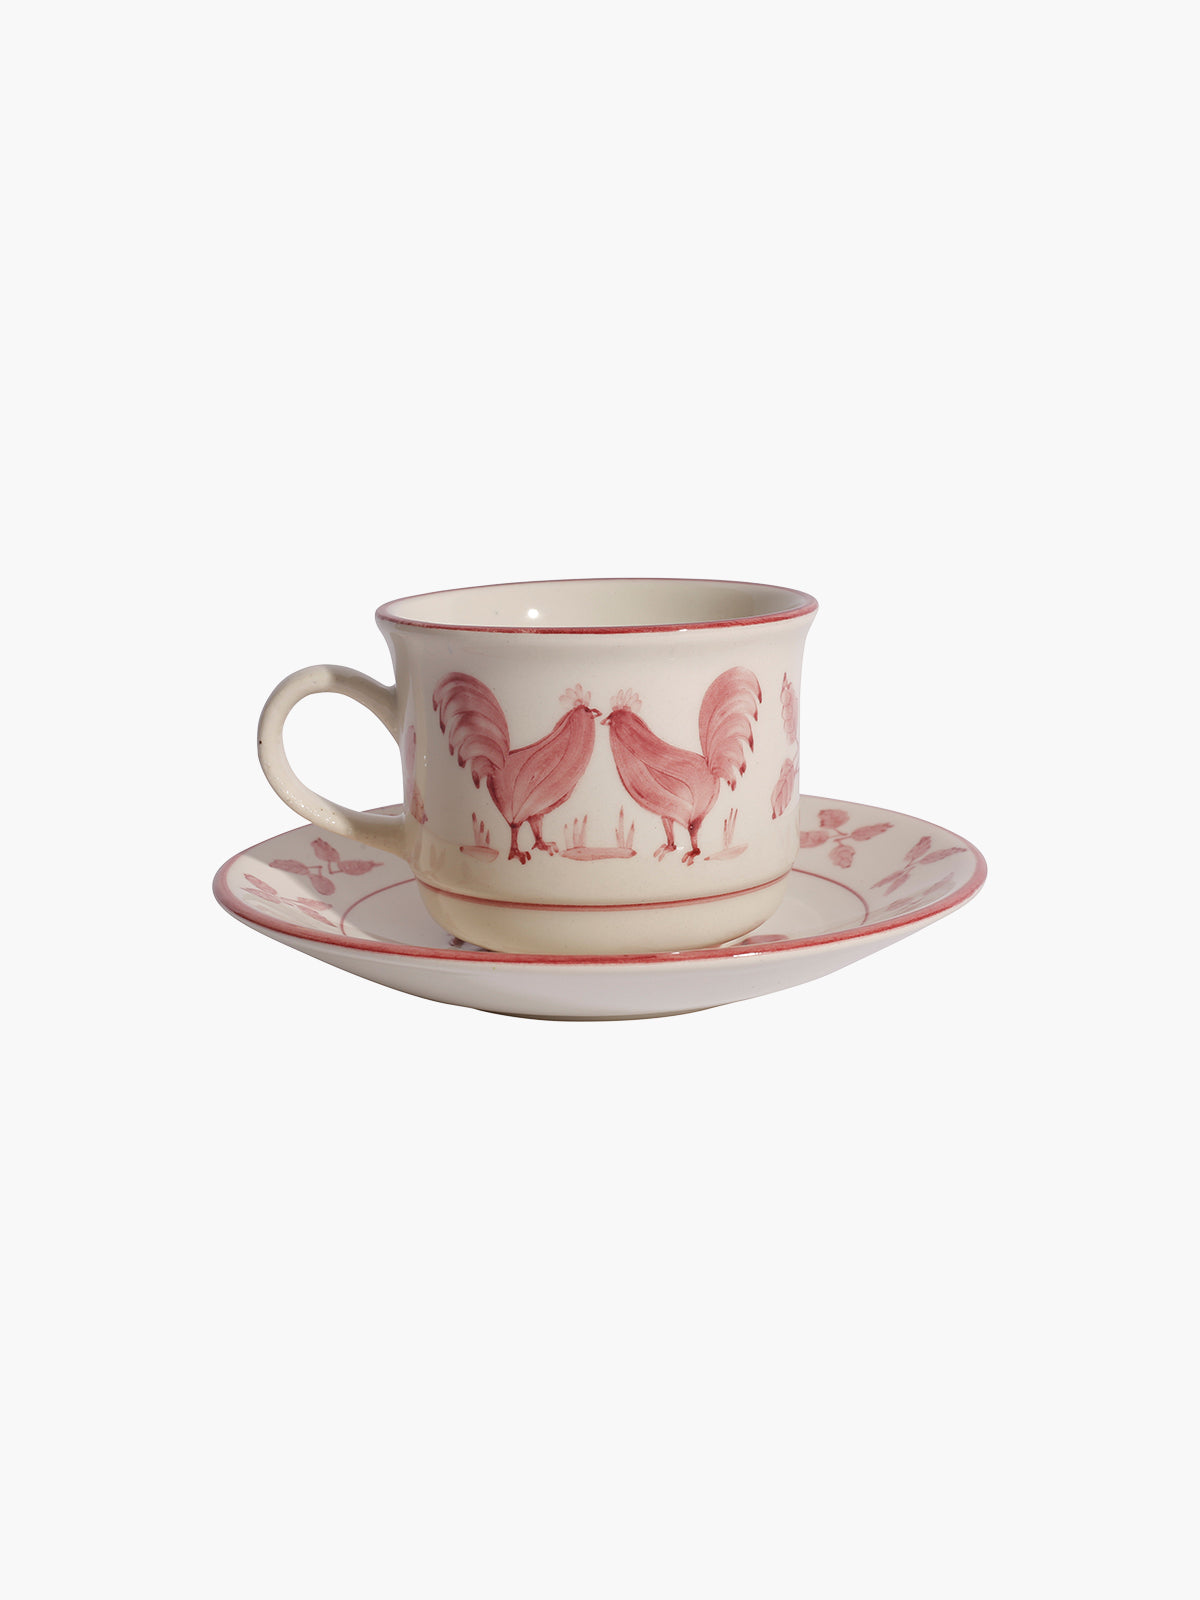 La Coquette Coffee or Tea Cup and Plate | Red